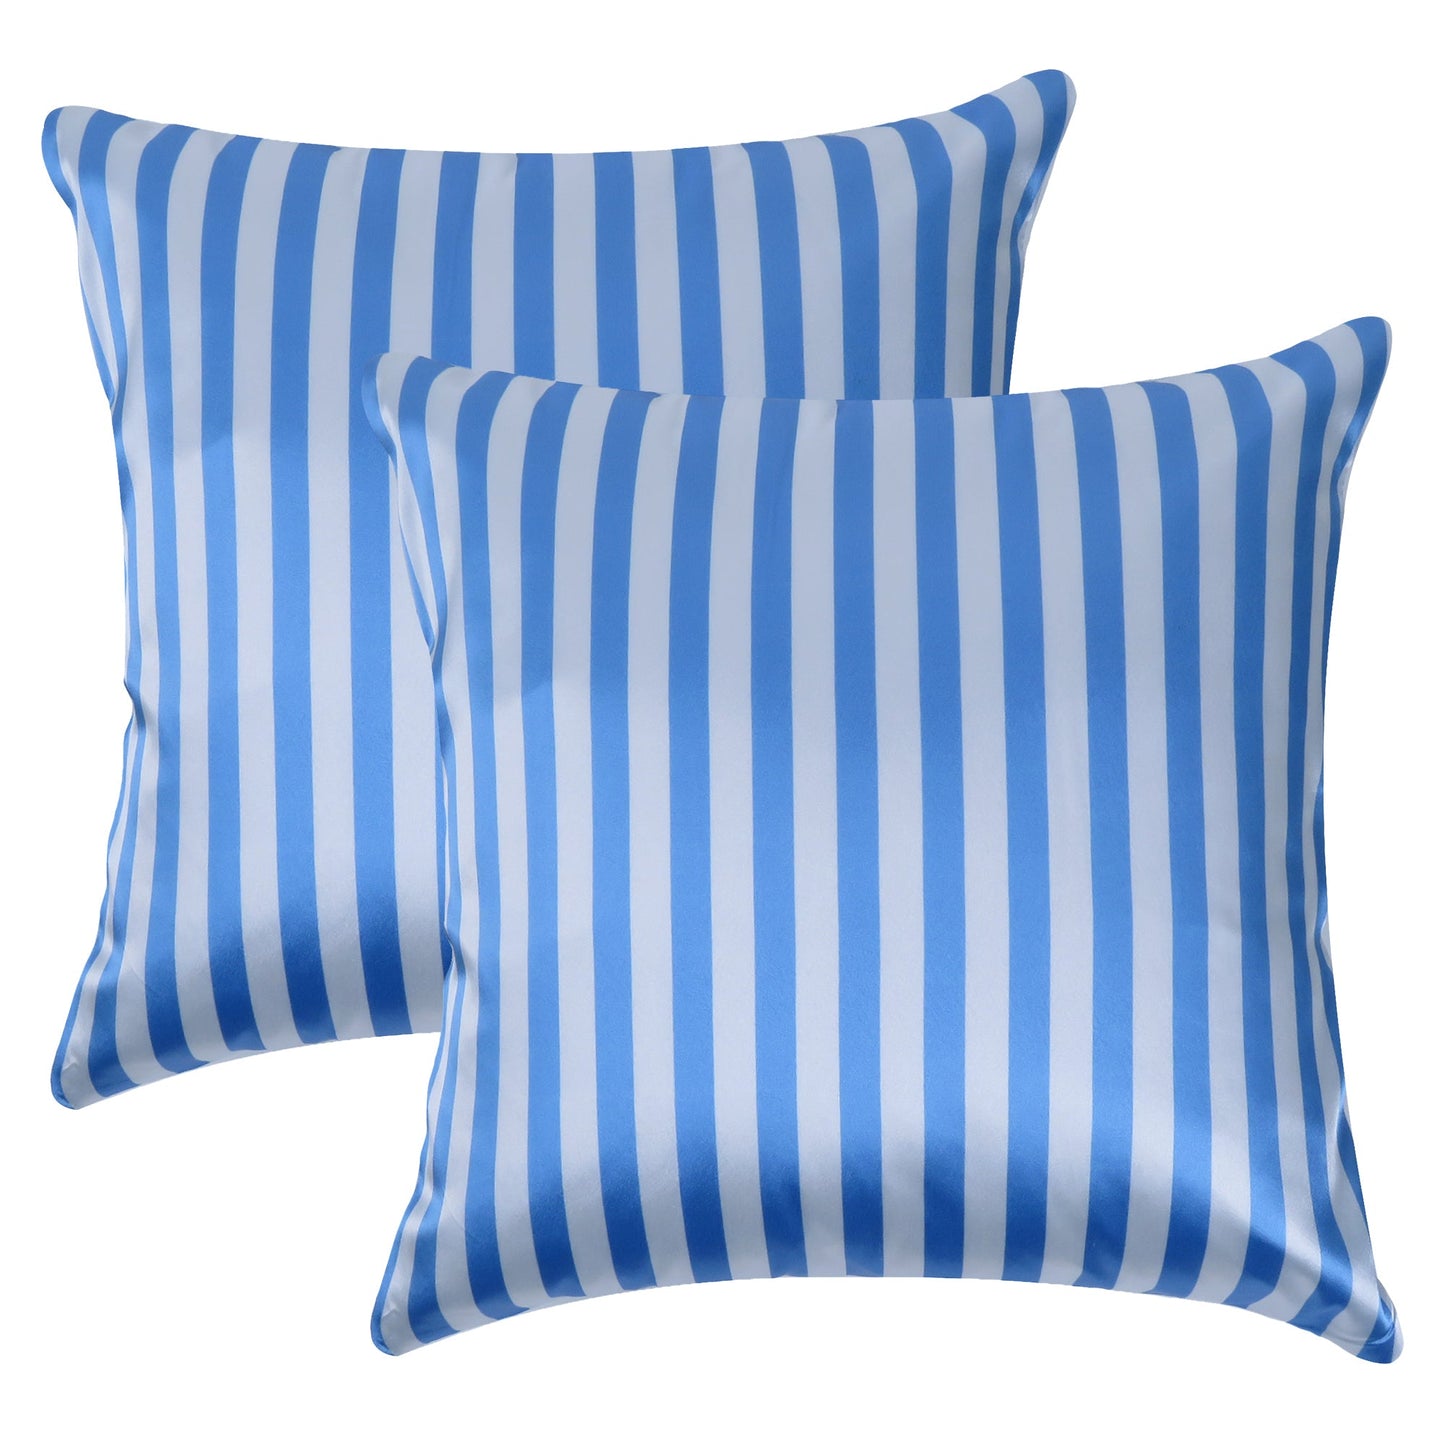 All Aboard Silky Striped Satin Silk Cushion Covers in Set of 2